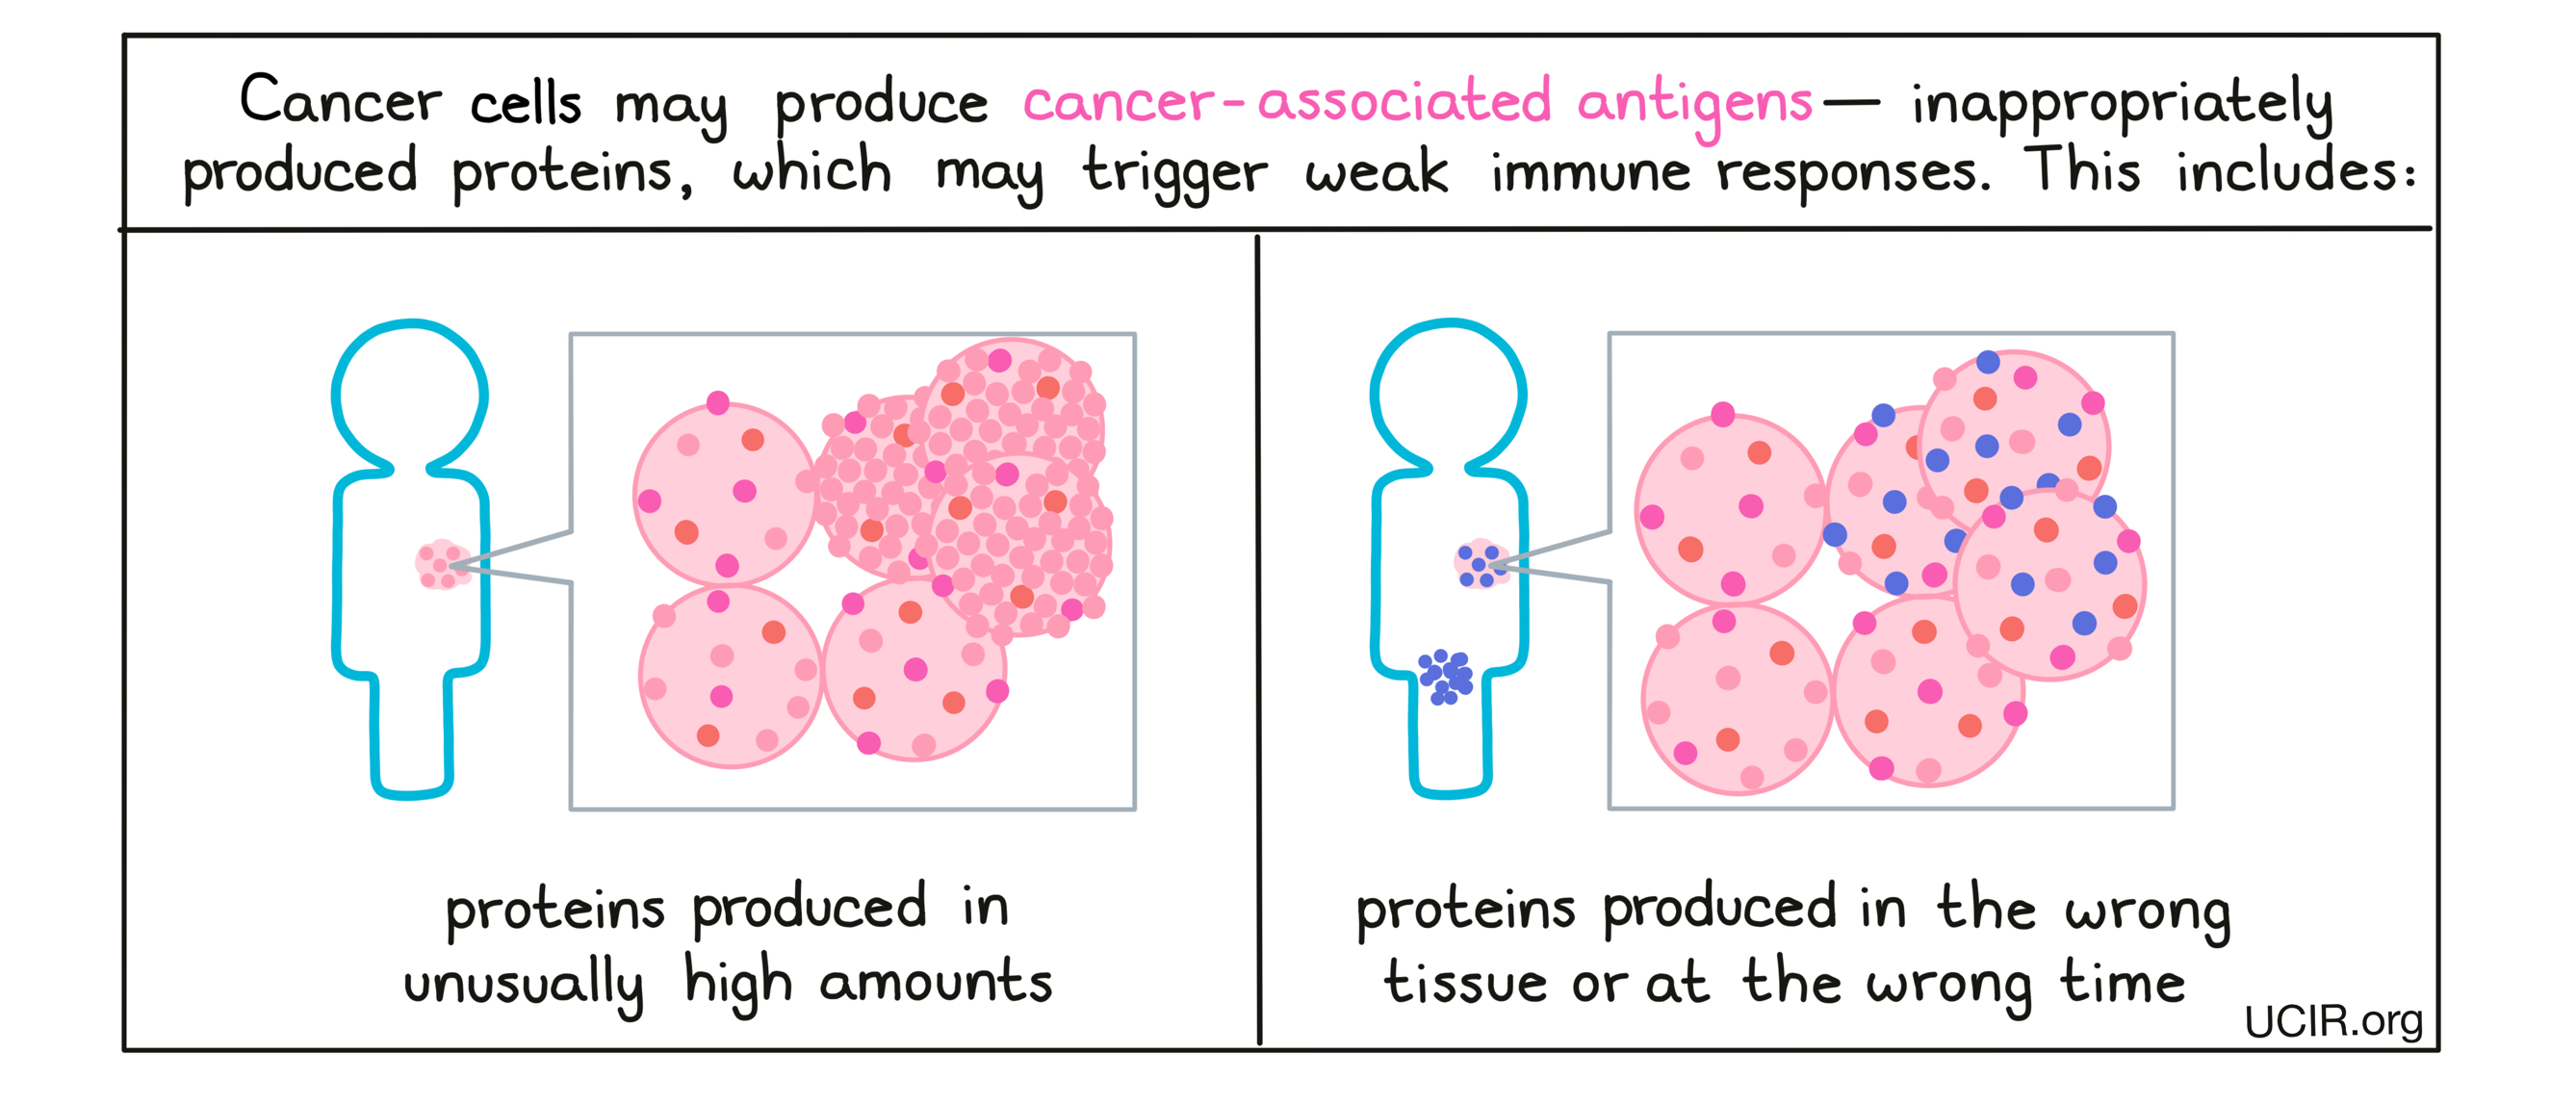 Cancer cells may produce cancer-associated antigens - inappropriately produced proteins, which may trigger weak immune responses